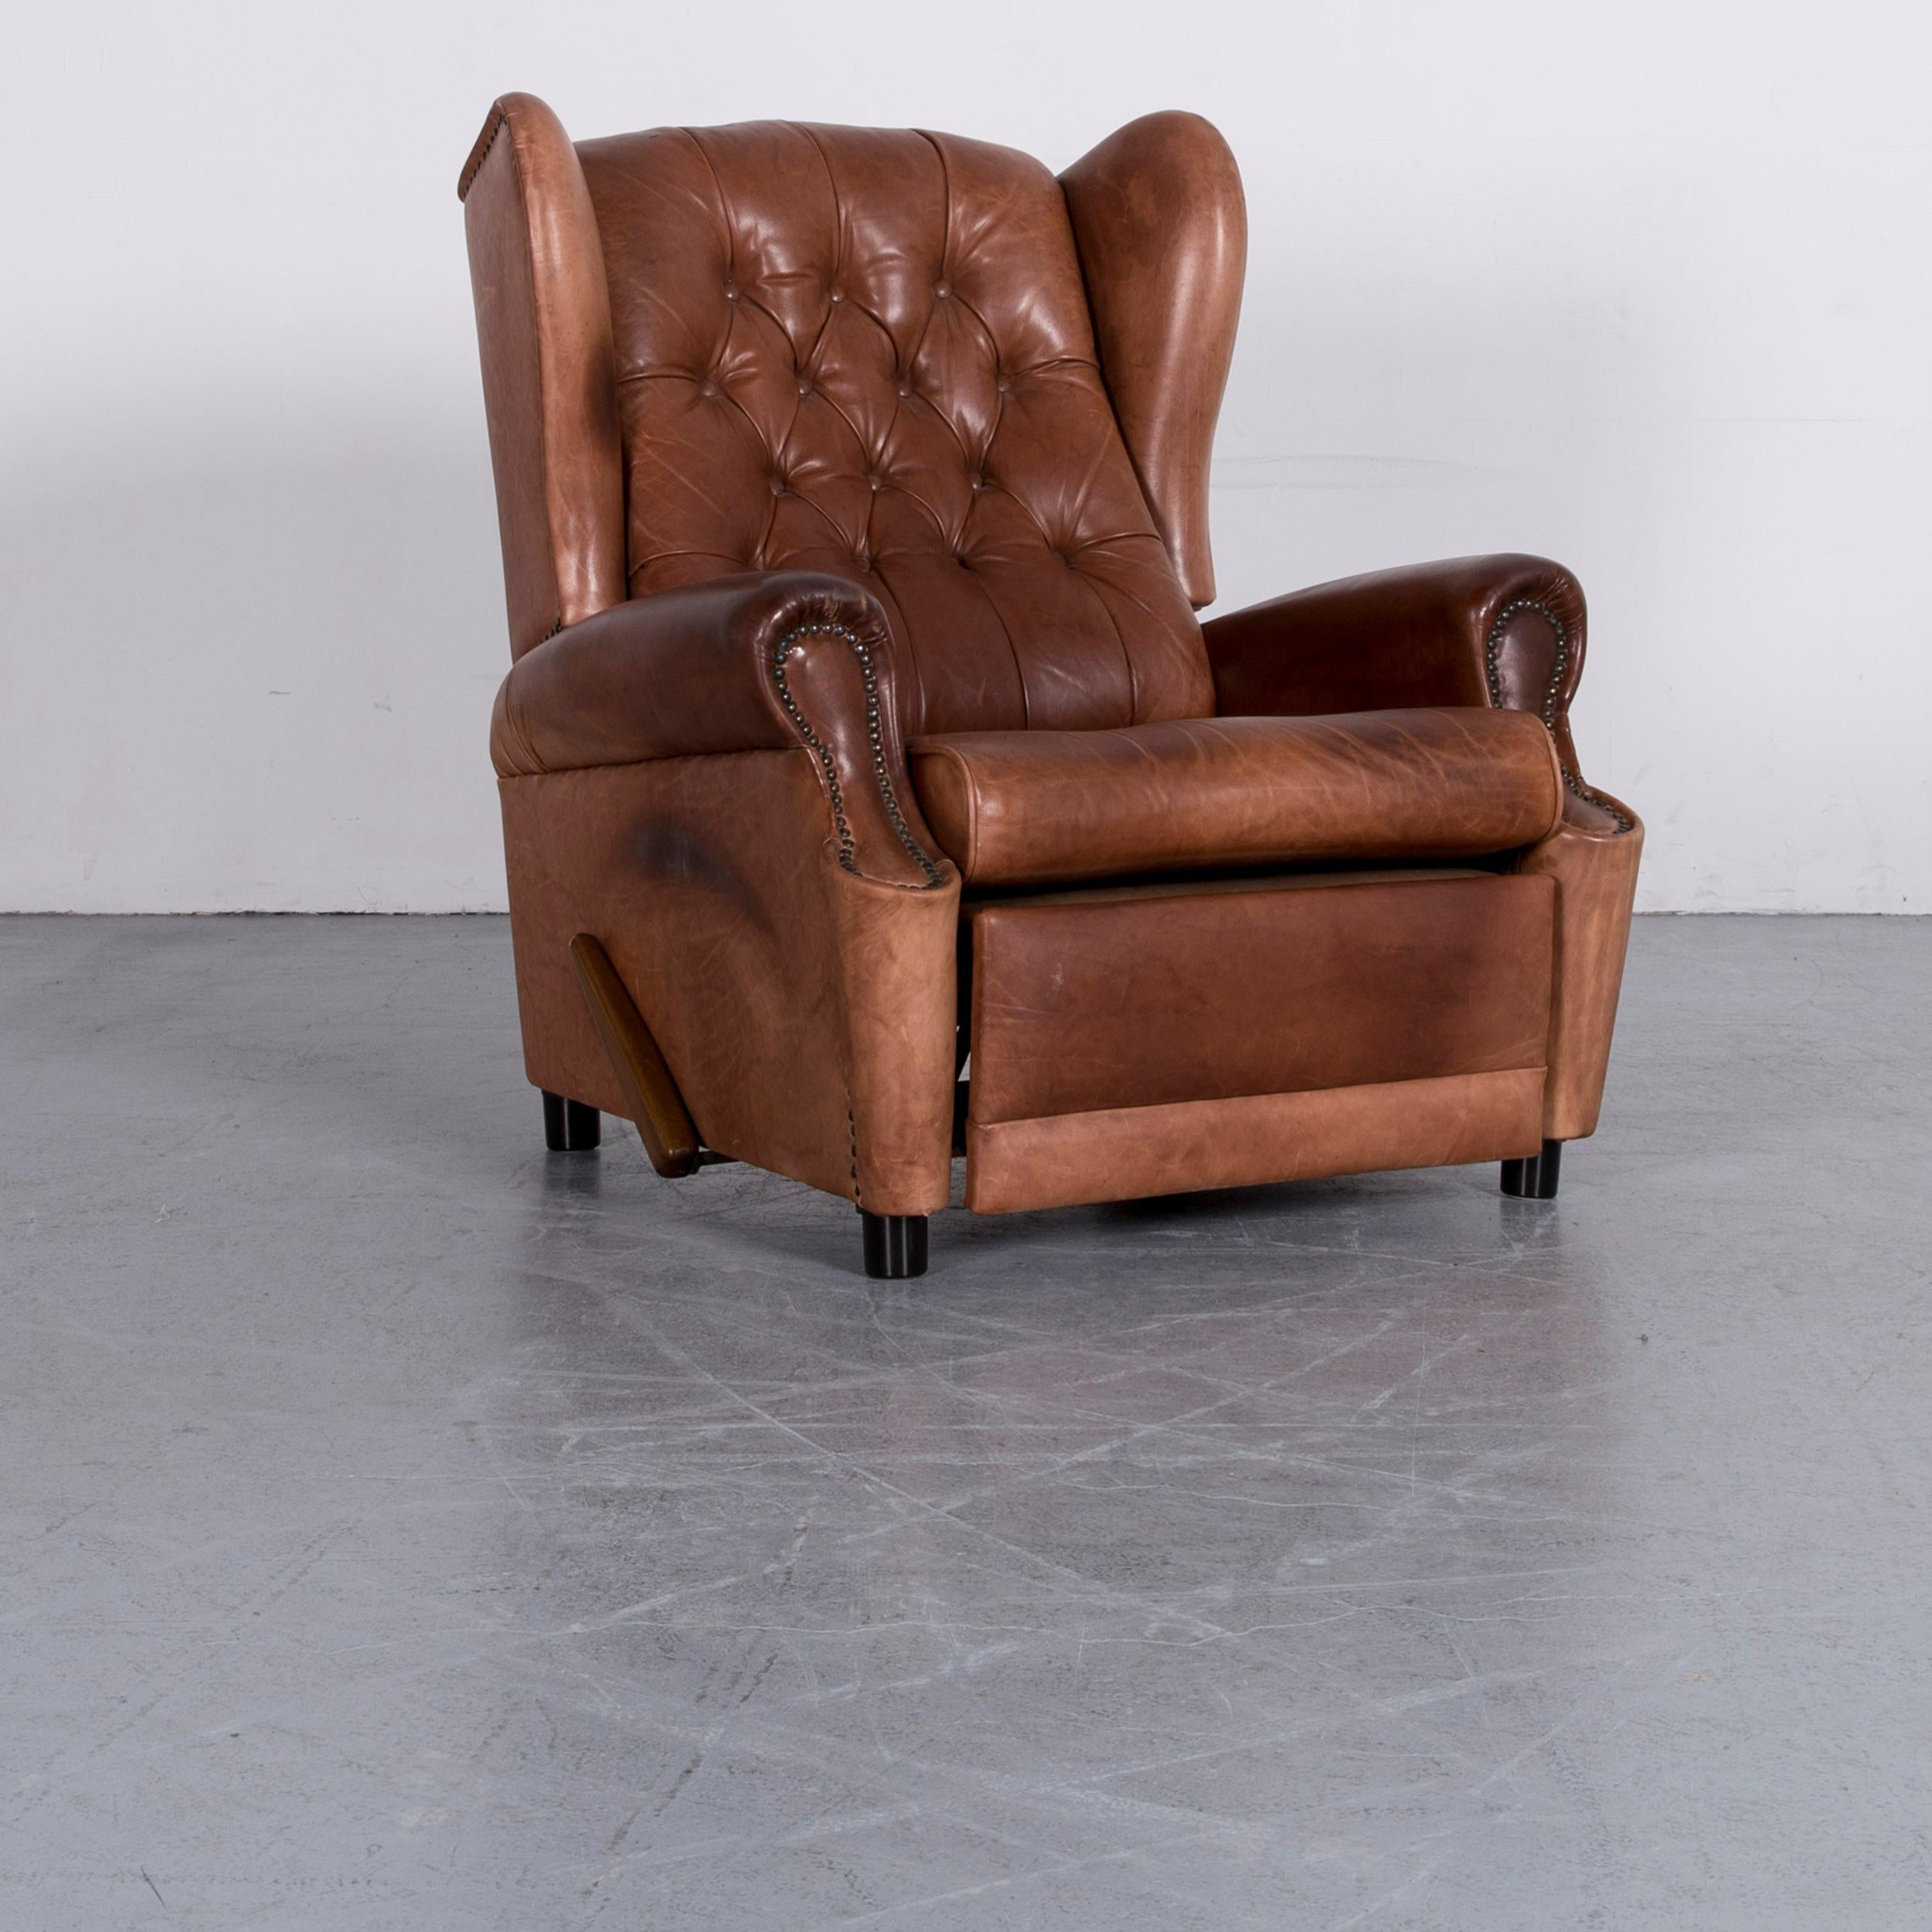 We bring to you an chesterfield leather armchair brown one-seat vintage retro with relax function.




























































  